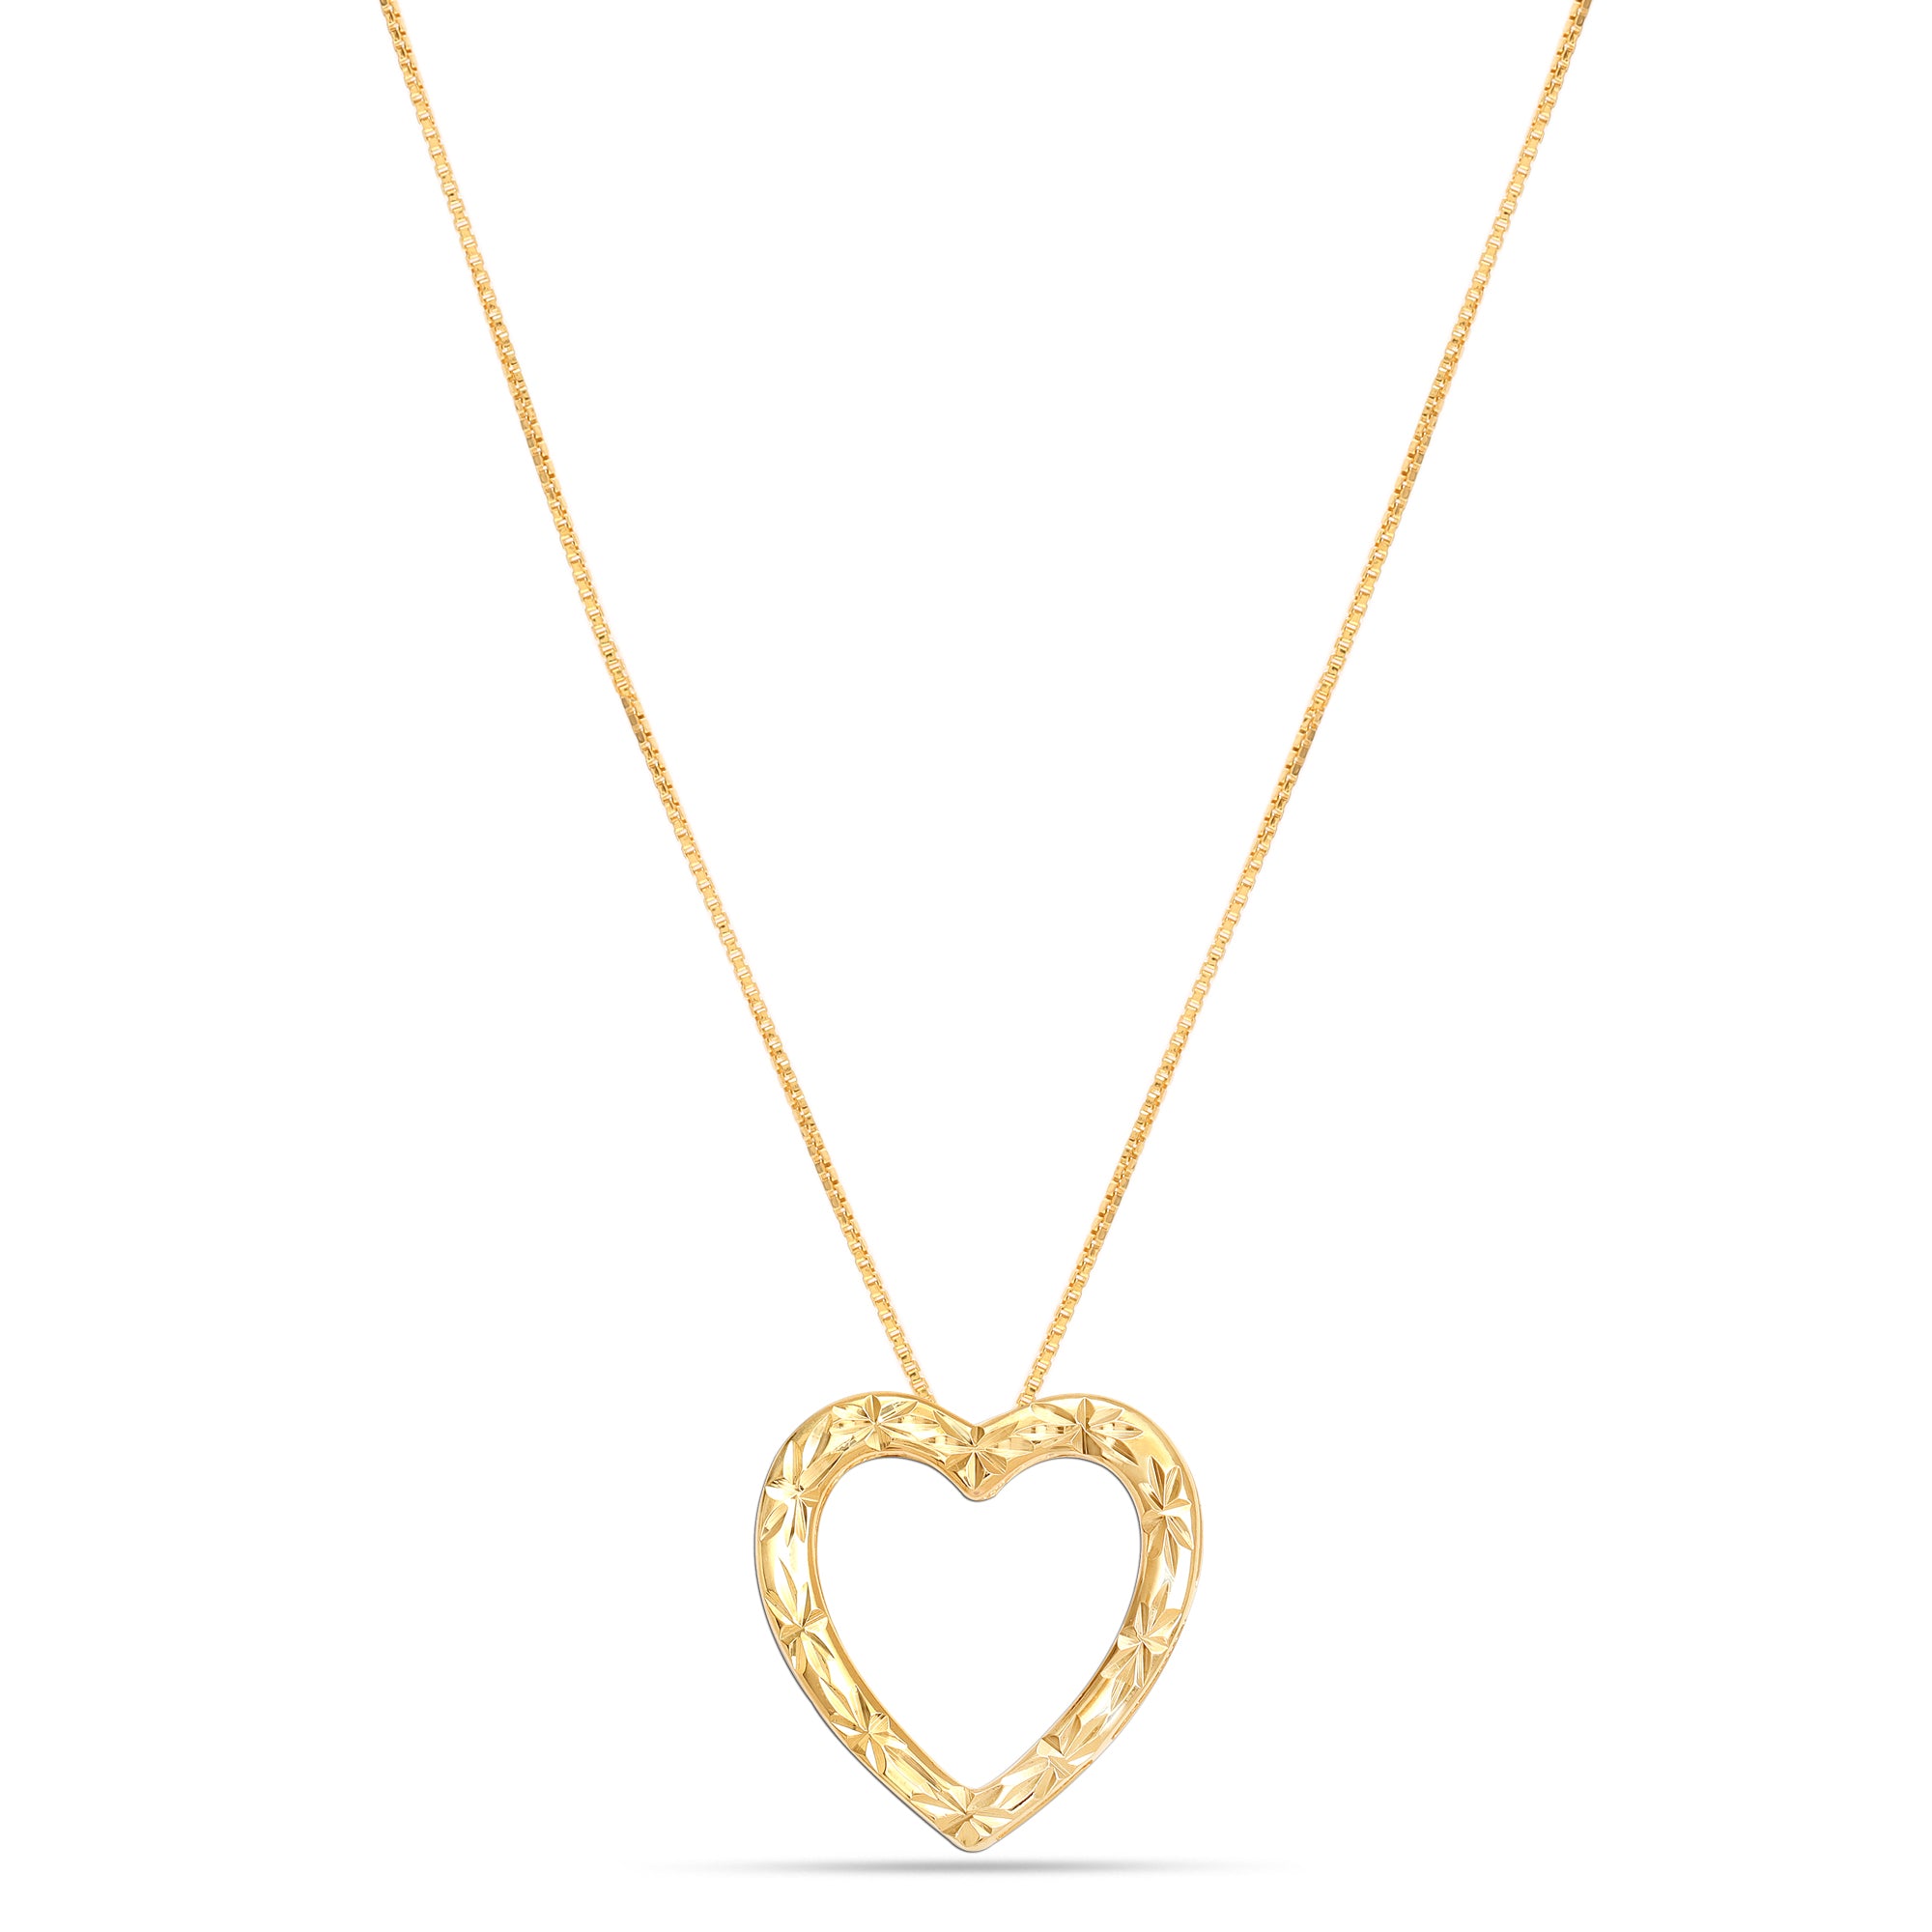 925 Sterling Silver 18K Gold-Plated Diamond-Cut Heart Reversible Necklace for Women Teen